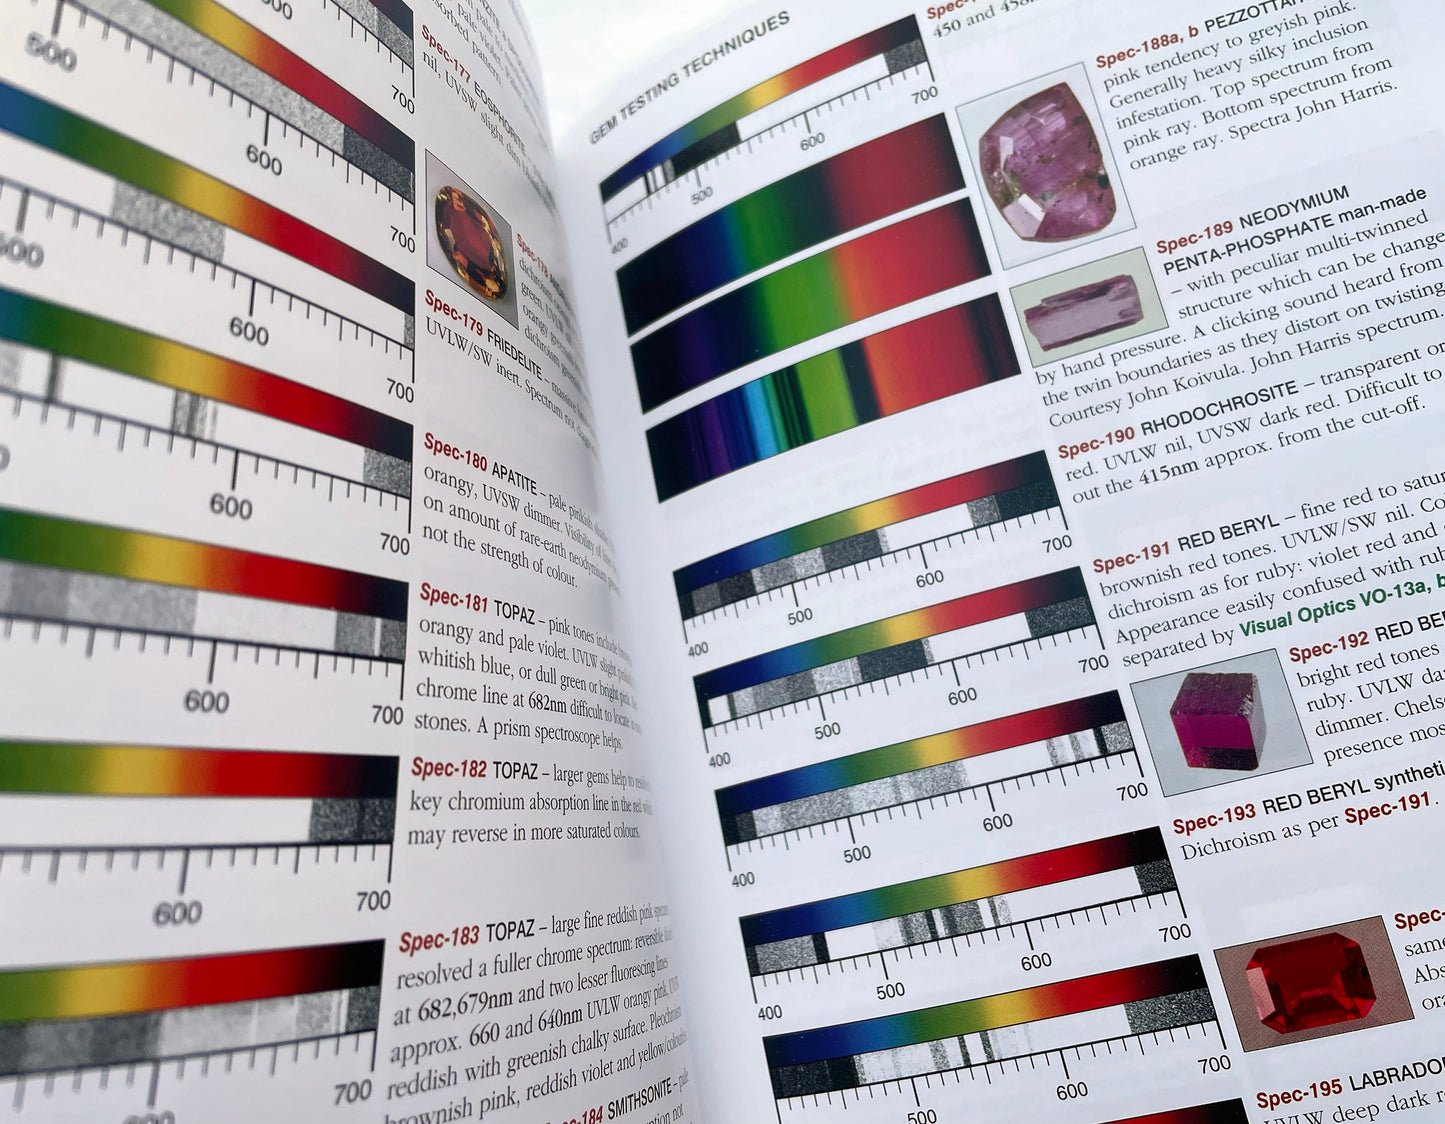 Colour spread from Gem Testing Techniques.